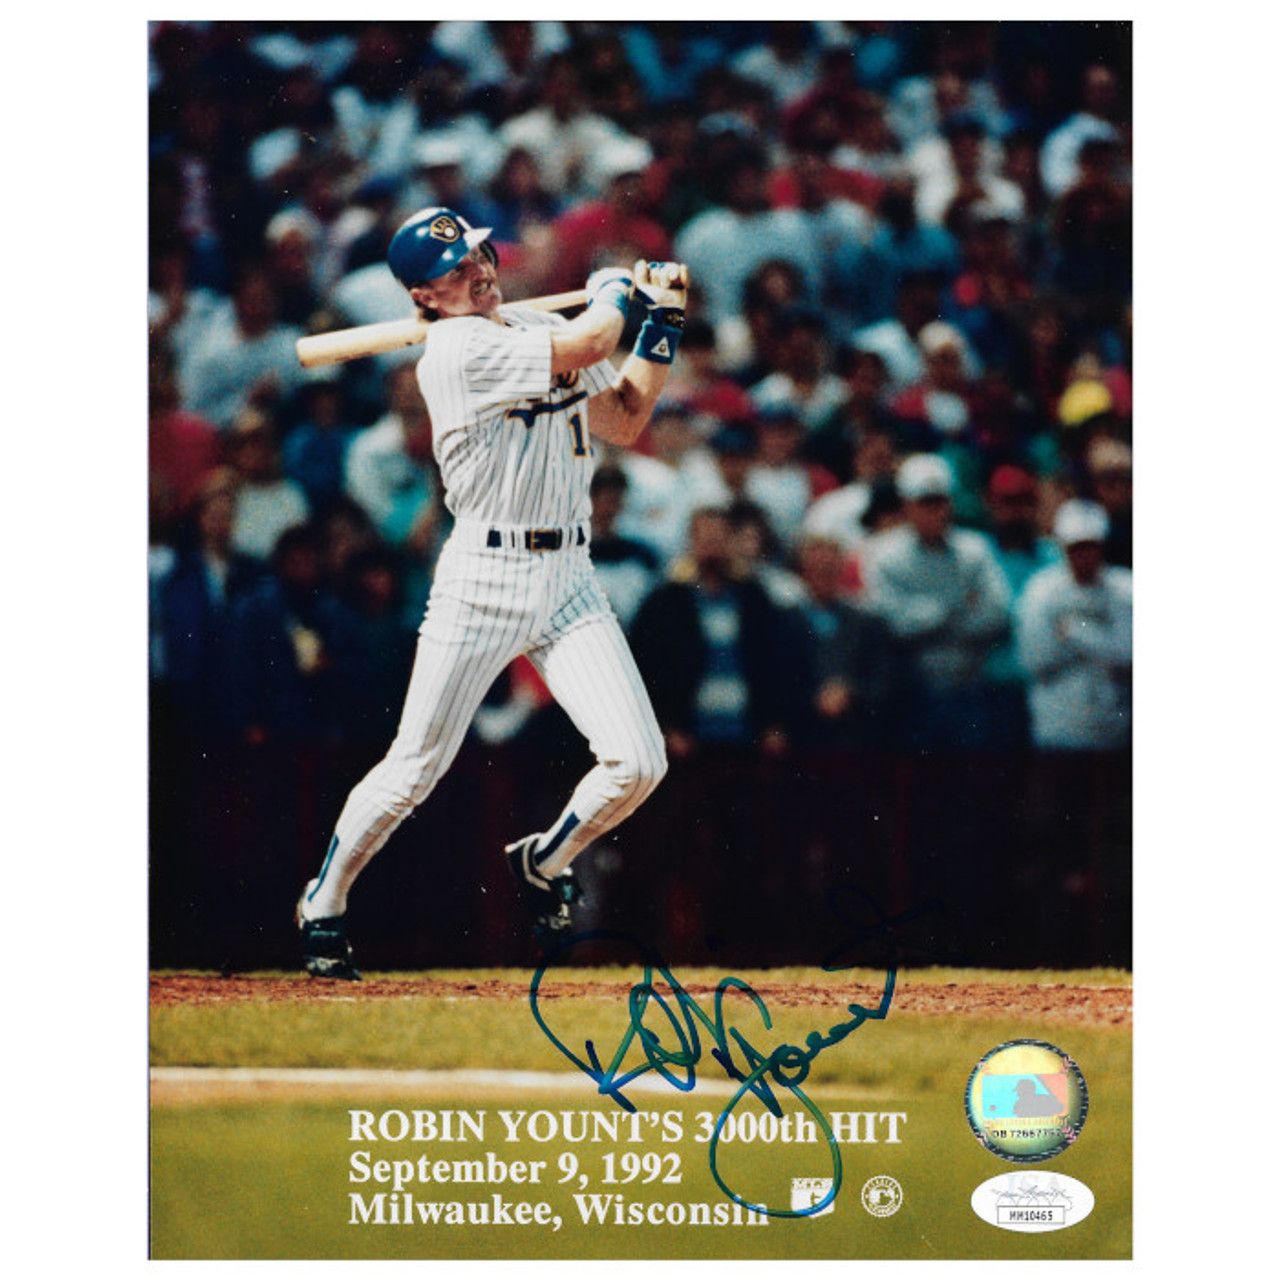 Robin Yount Autographed 8x10 Photograph - 3,000 Hits (JSA)